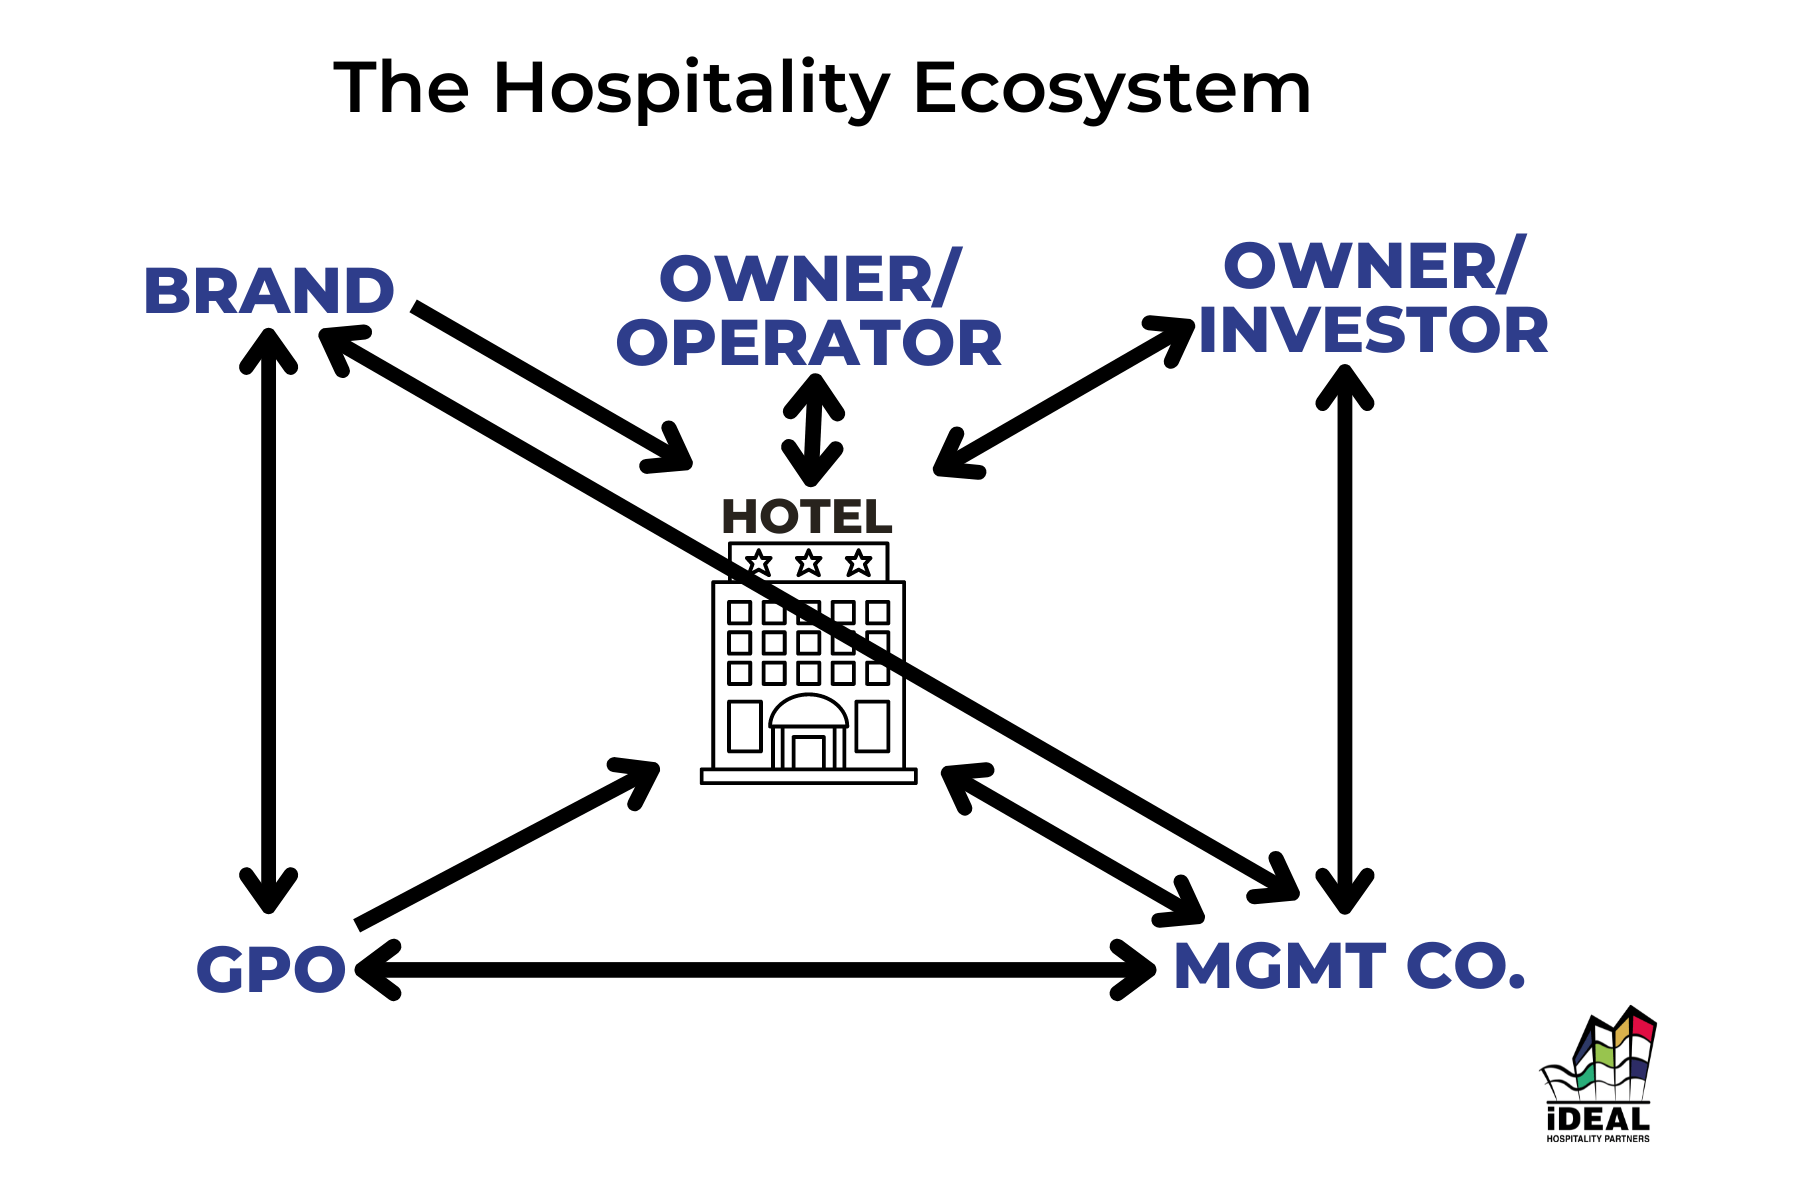 Selling Products to Hotels is Complex